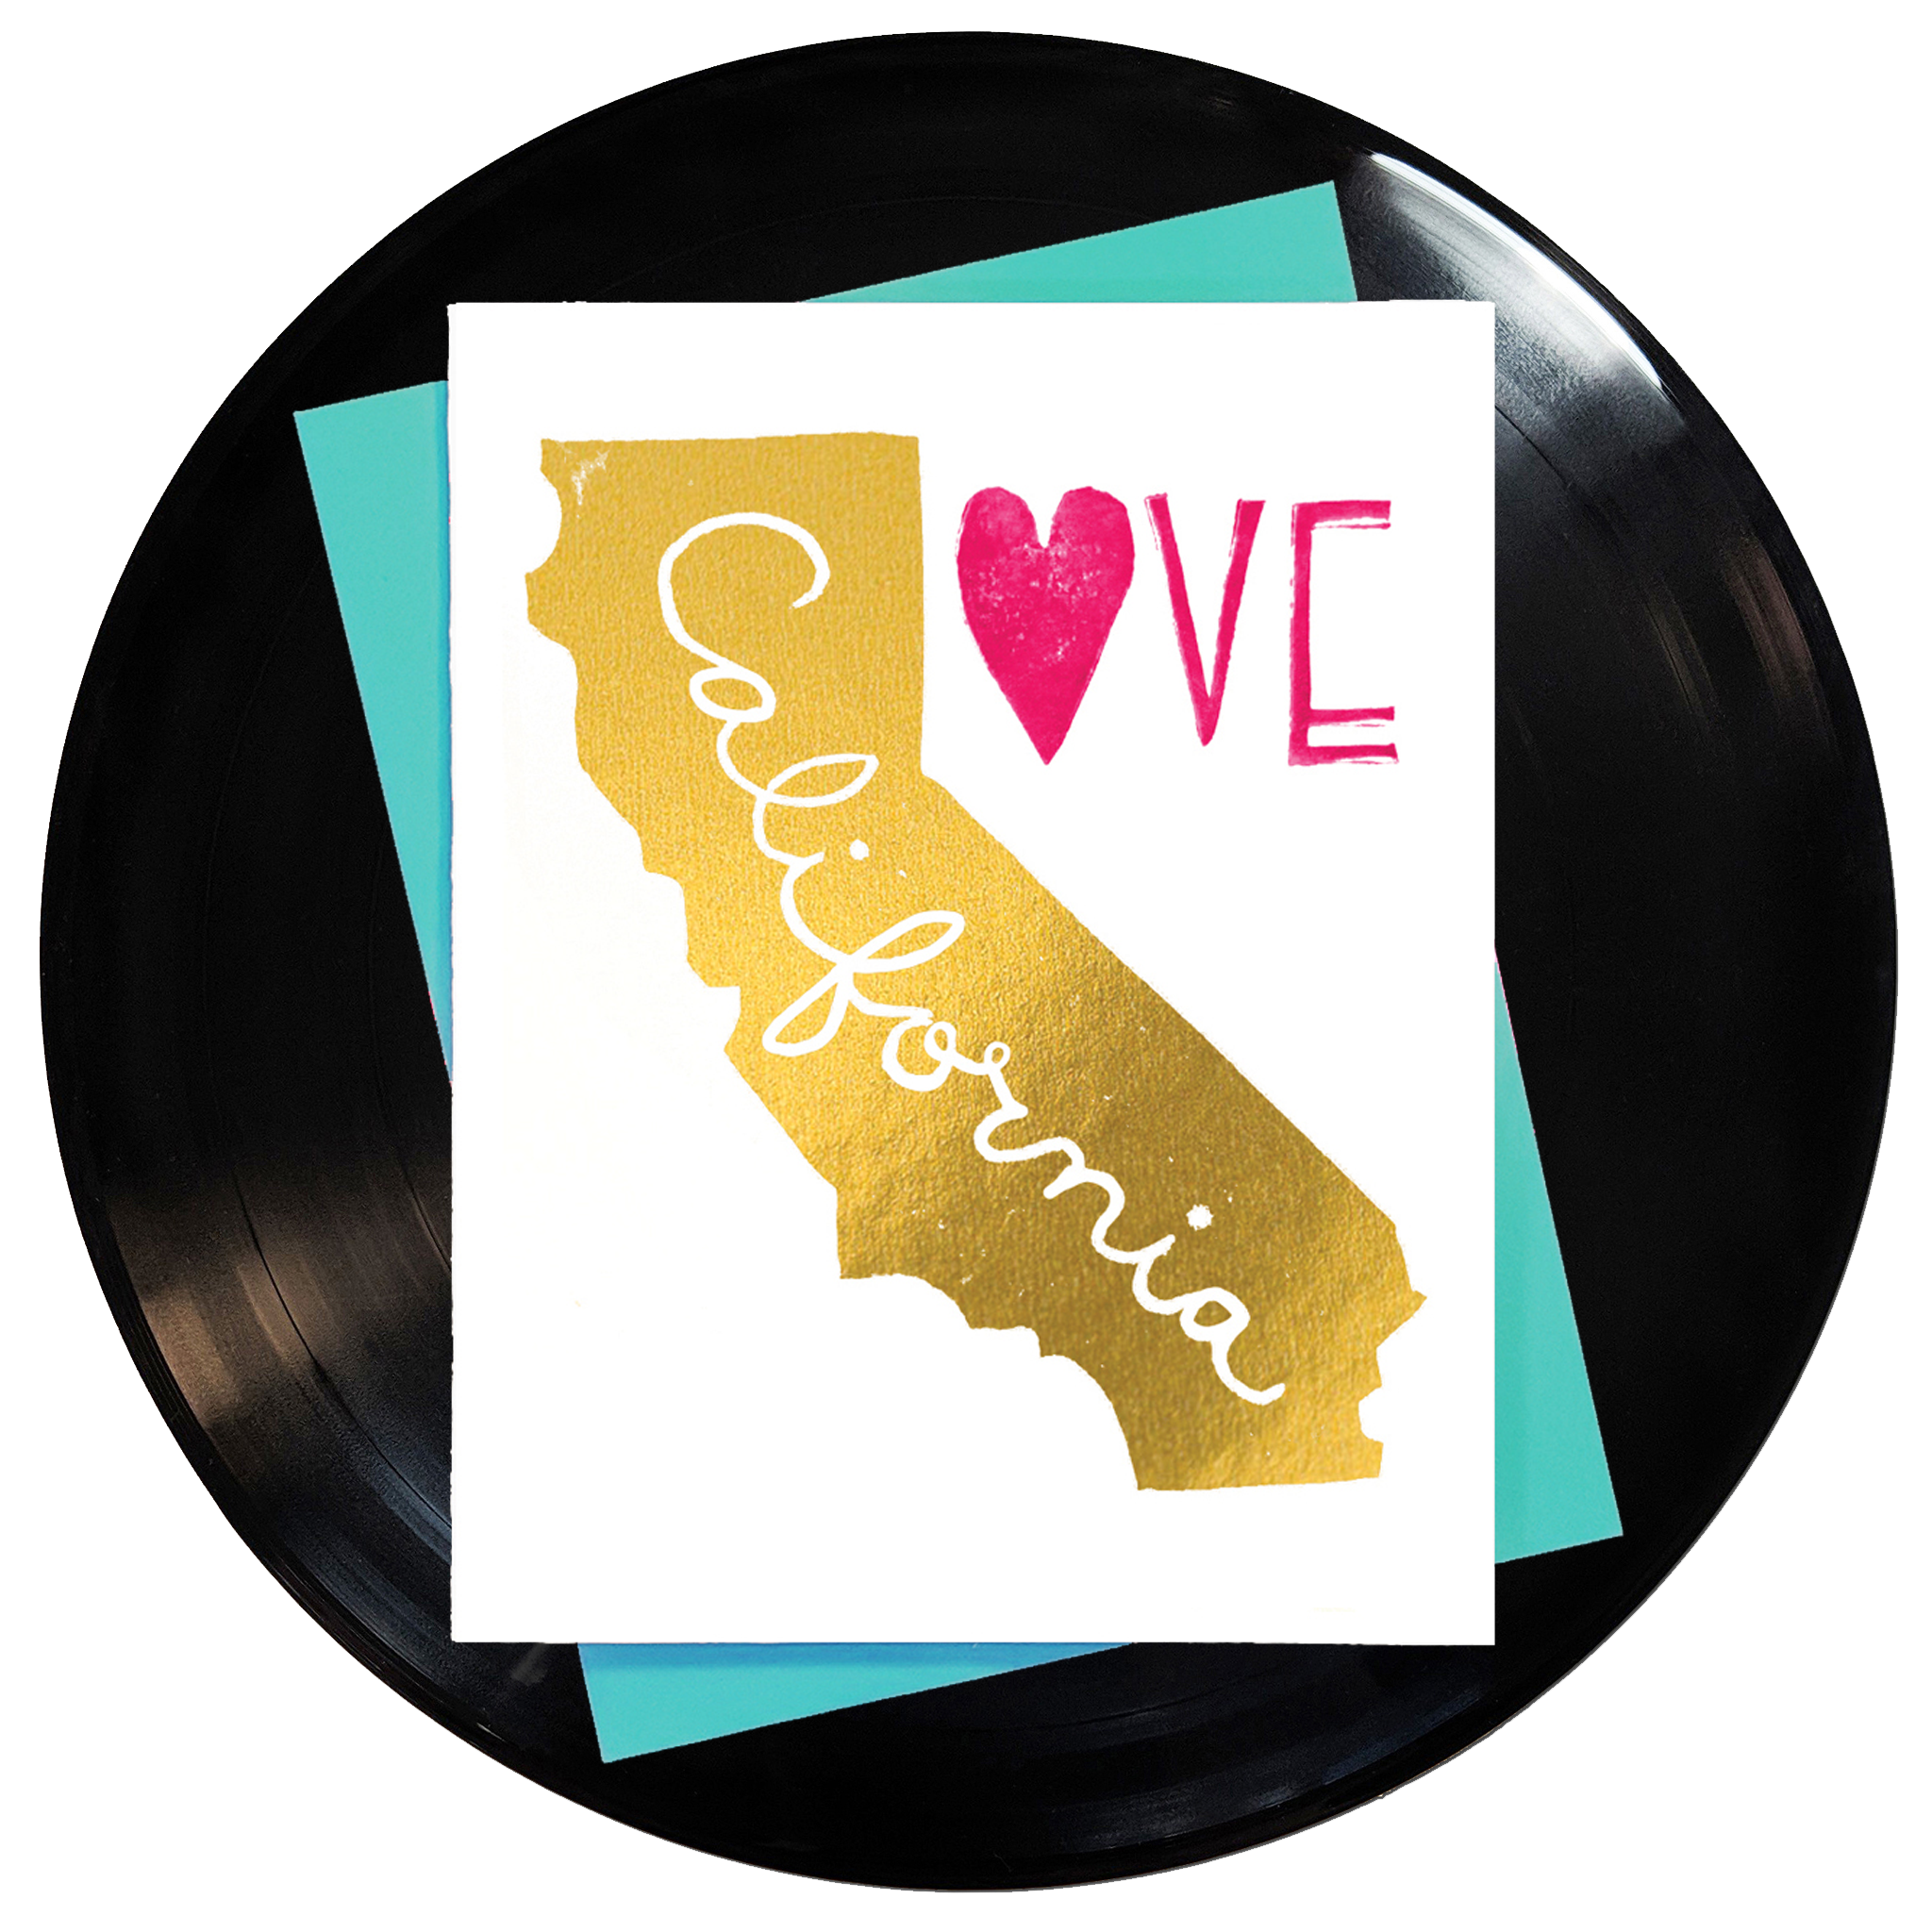 California Love Greeting Card 6-Pack Inspired By Music